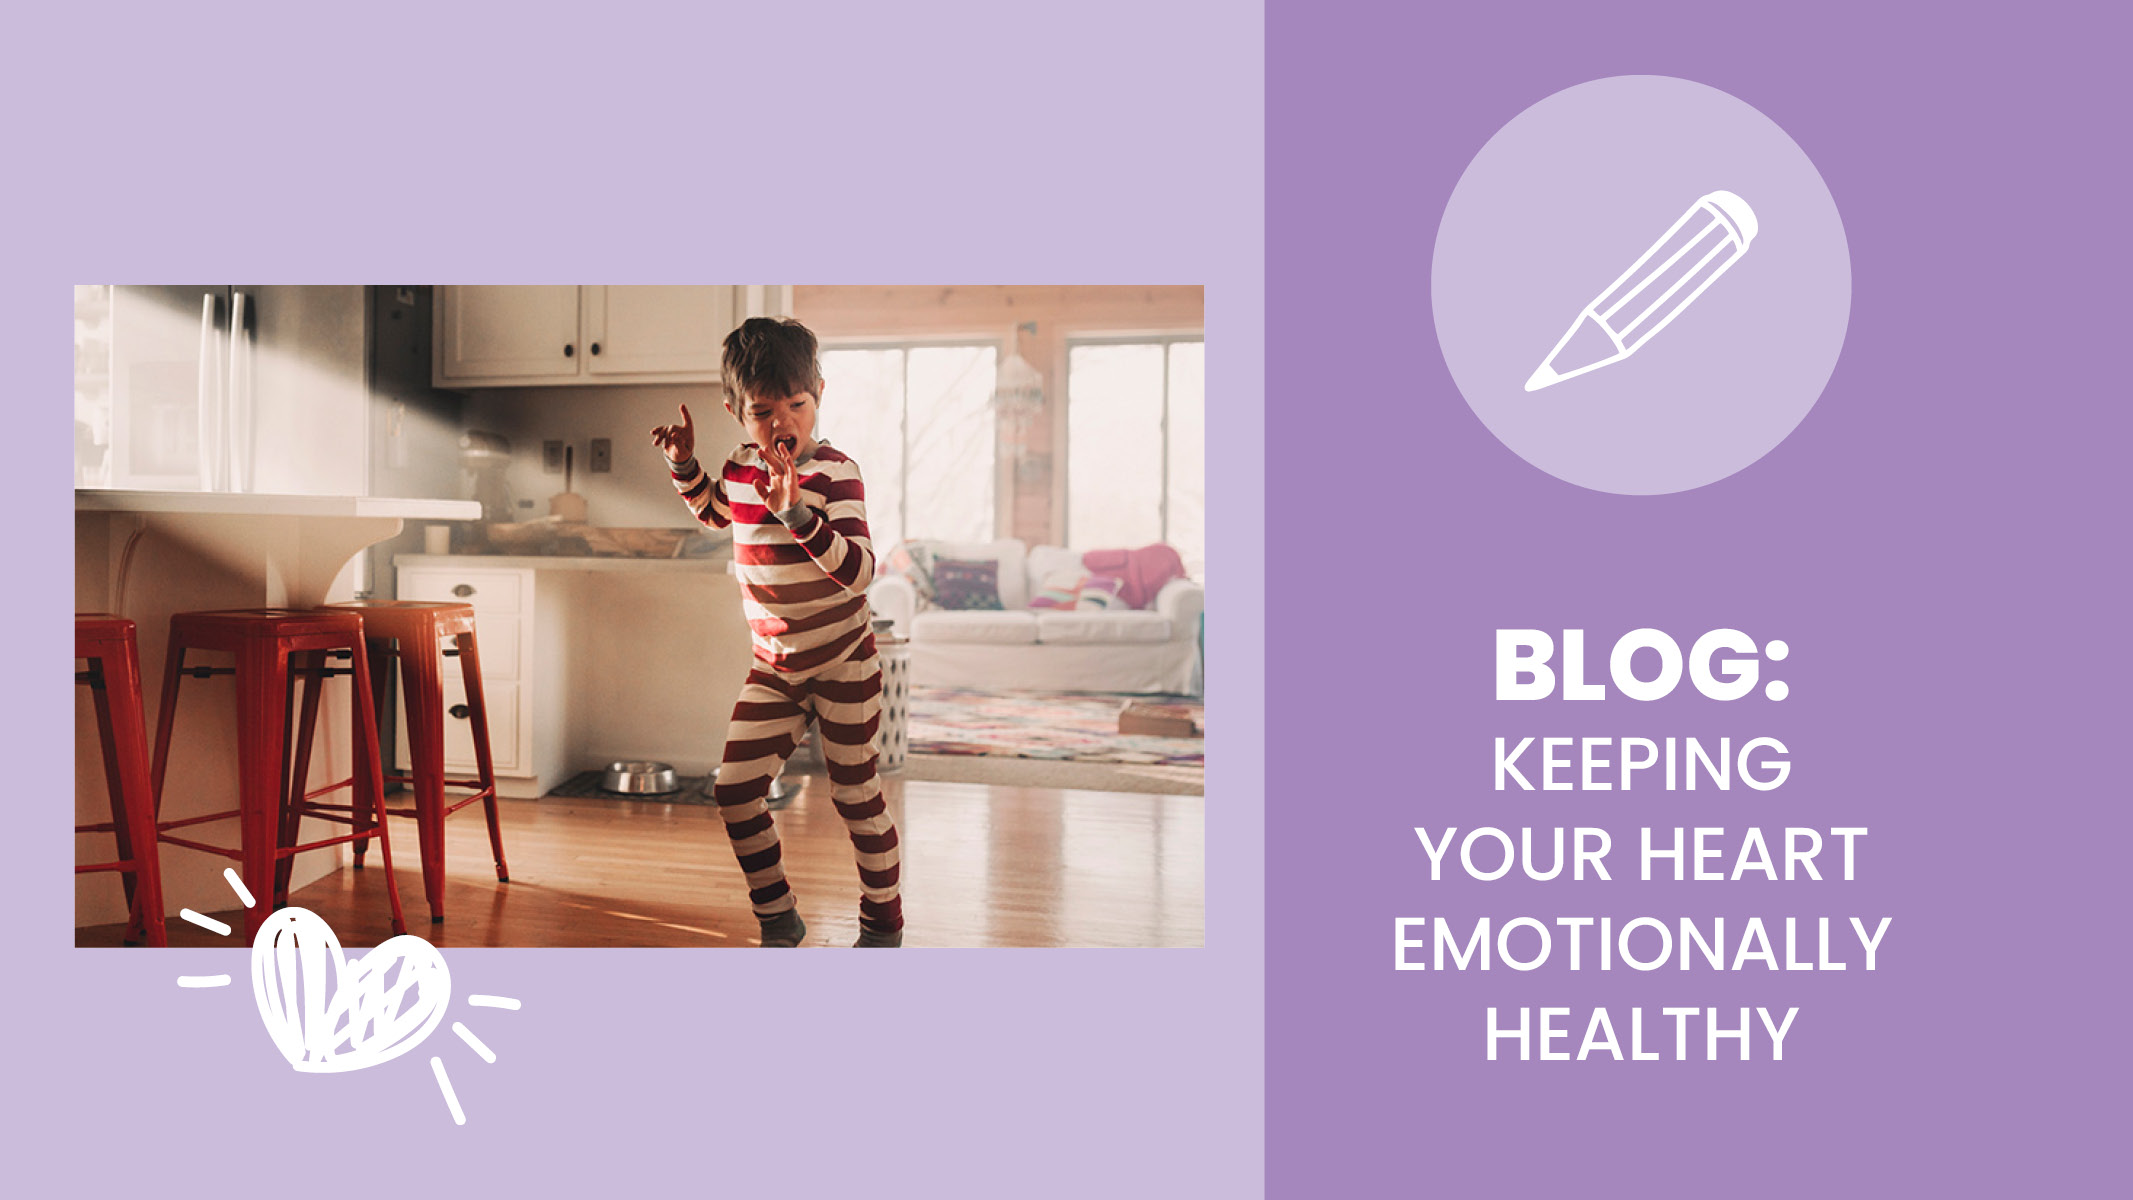 Young child, boy, dances in his kitchen while keeping his heart healthy